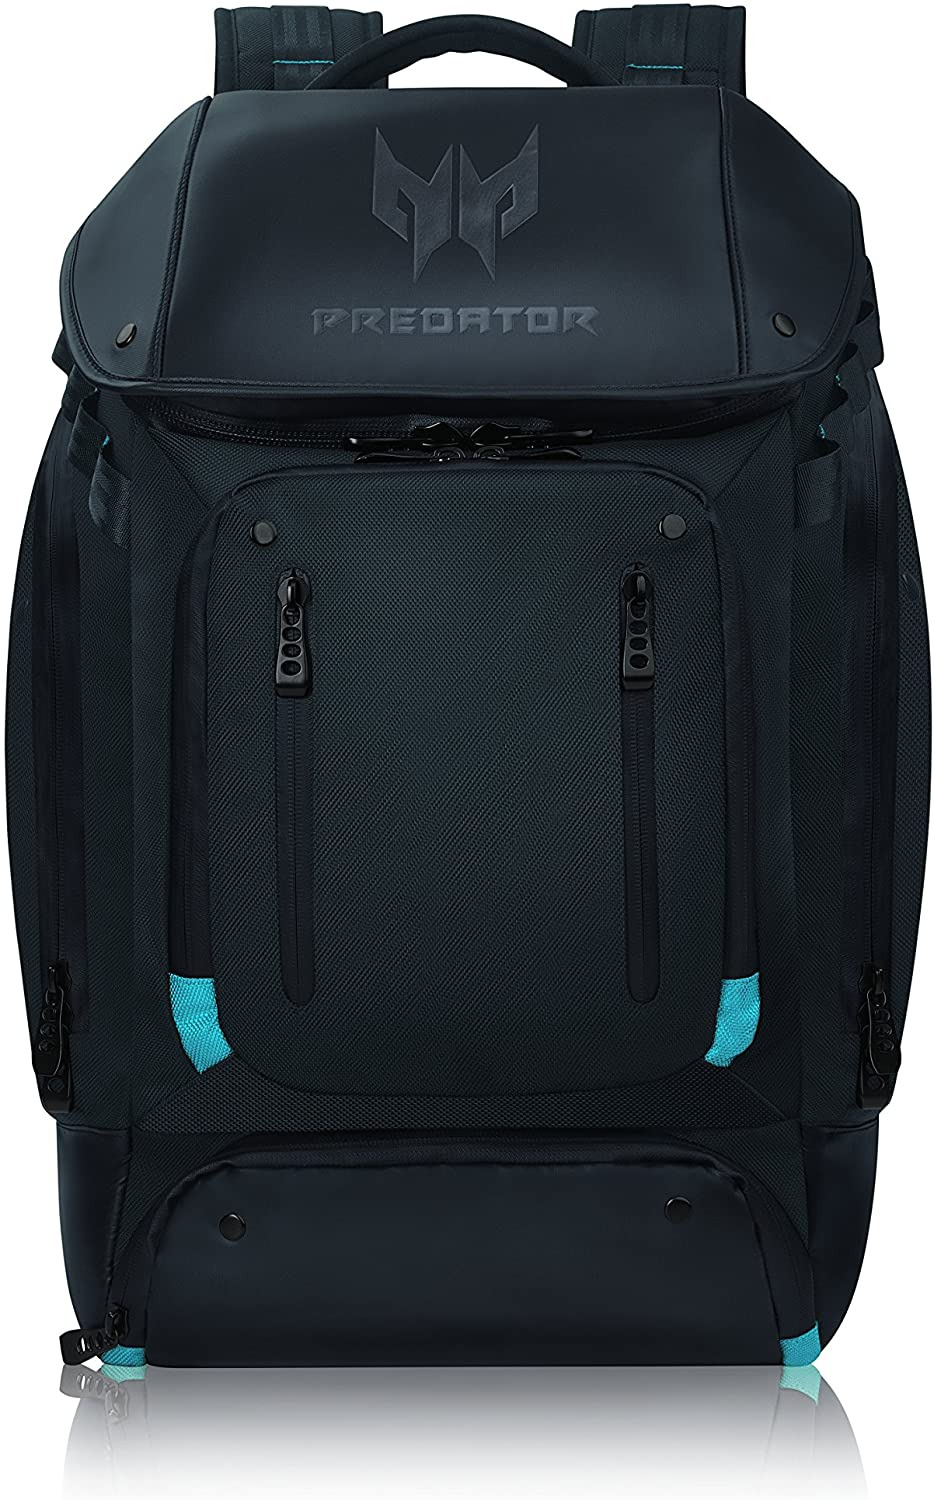 Acer Predator Utility Gaming Backpack, Water Resistant and Tear Proof Travel Bac